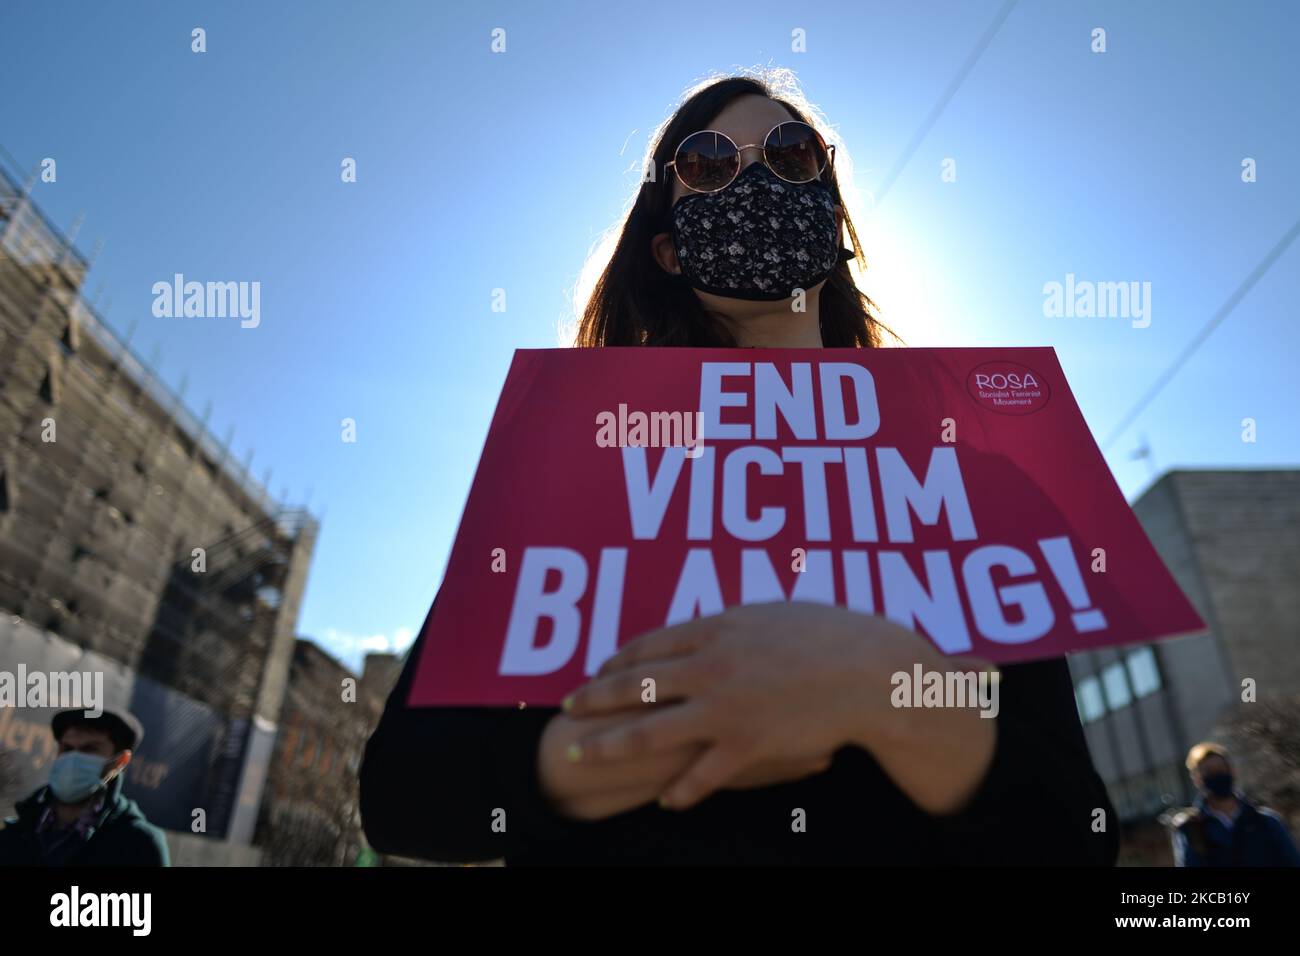 An activist holds a placard reading 'End Victim Blaming!' during a solidarity protest with women in the UK against gender-based violence seen on O'Connell Street in Dublin. The tragic killing of 33-year-old Sarah Everard in London sparked outrage among women in Britain, Ireland and across the world. Activists demand further action to combat violence against women. On Tuesday, 16 March 2021, in Dublin, Ireland. (Photo by Artur Widak/NurPhoto) Stock Photo